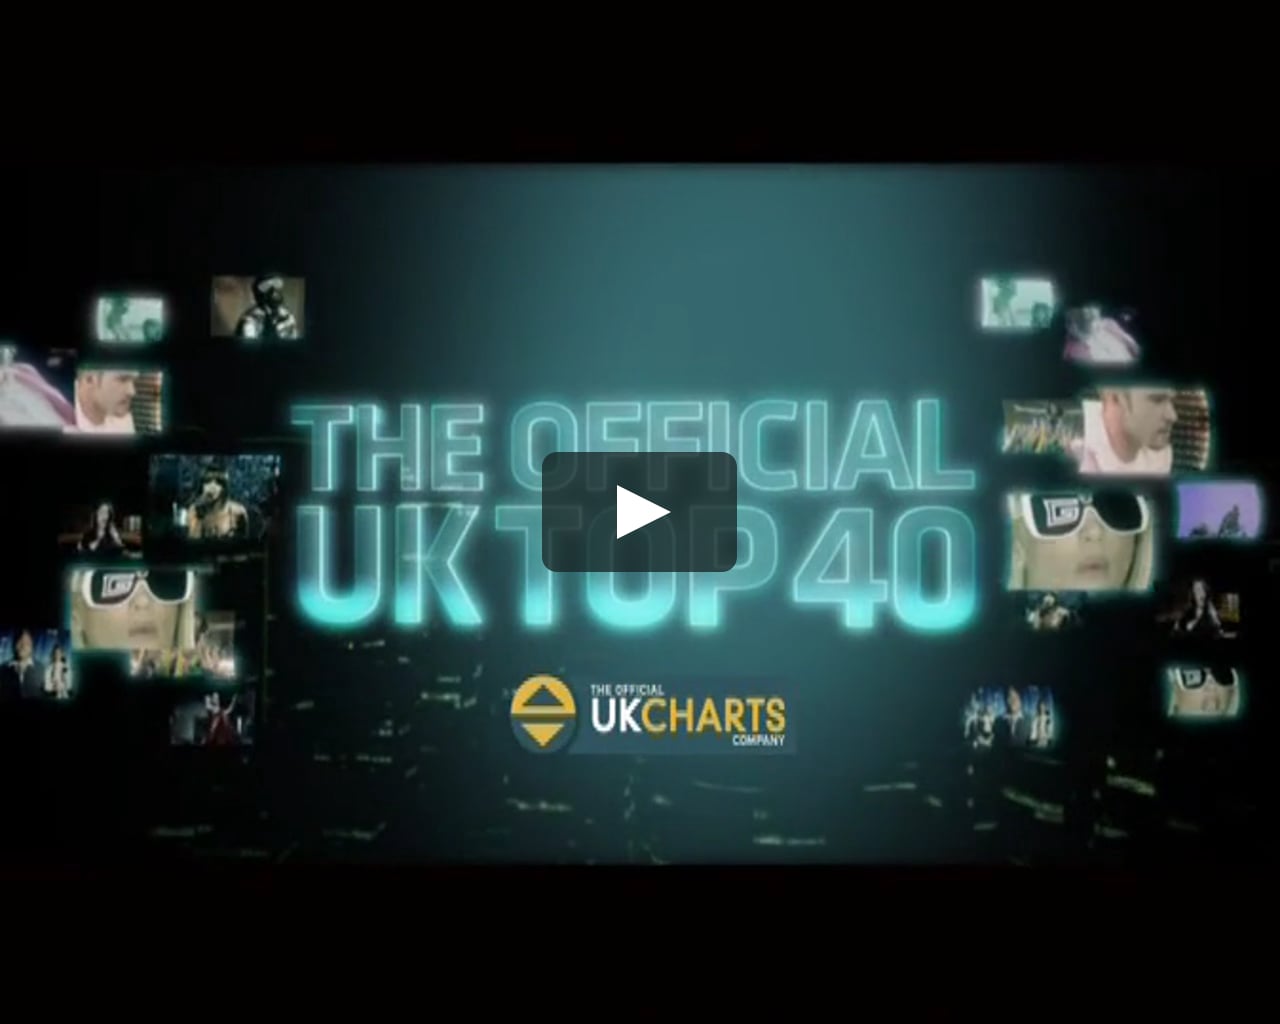 Official UK Top 40 on Vimeo